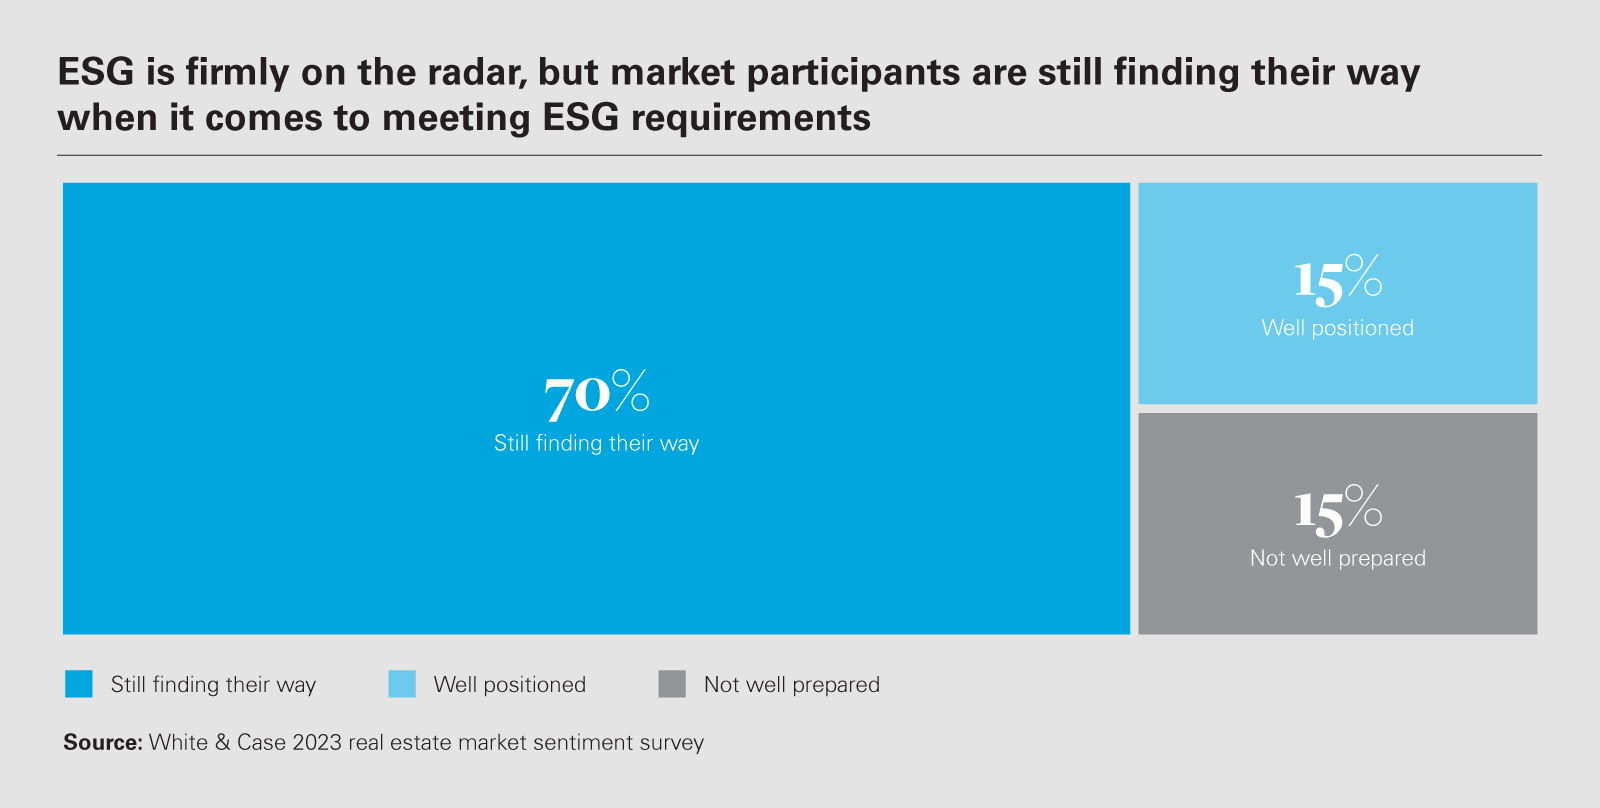 ESG is firmly on the radar, but market participants are still finding their ways when it comes to meet ESG requirements